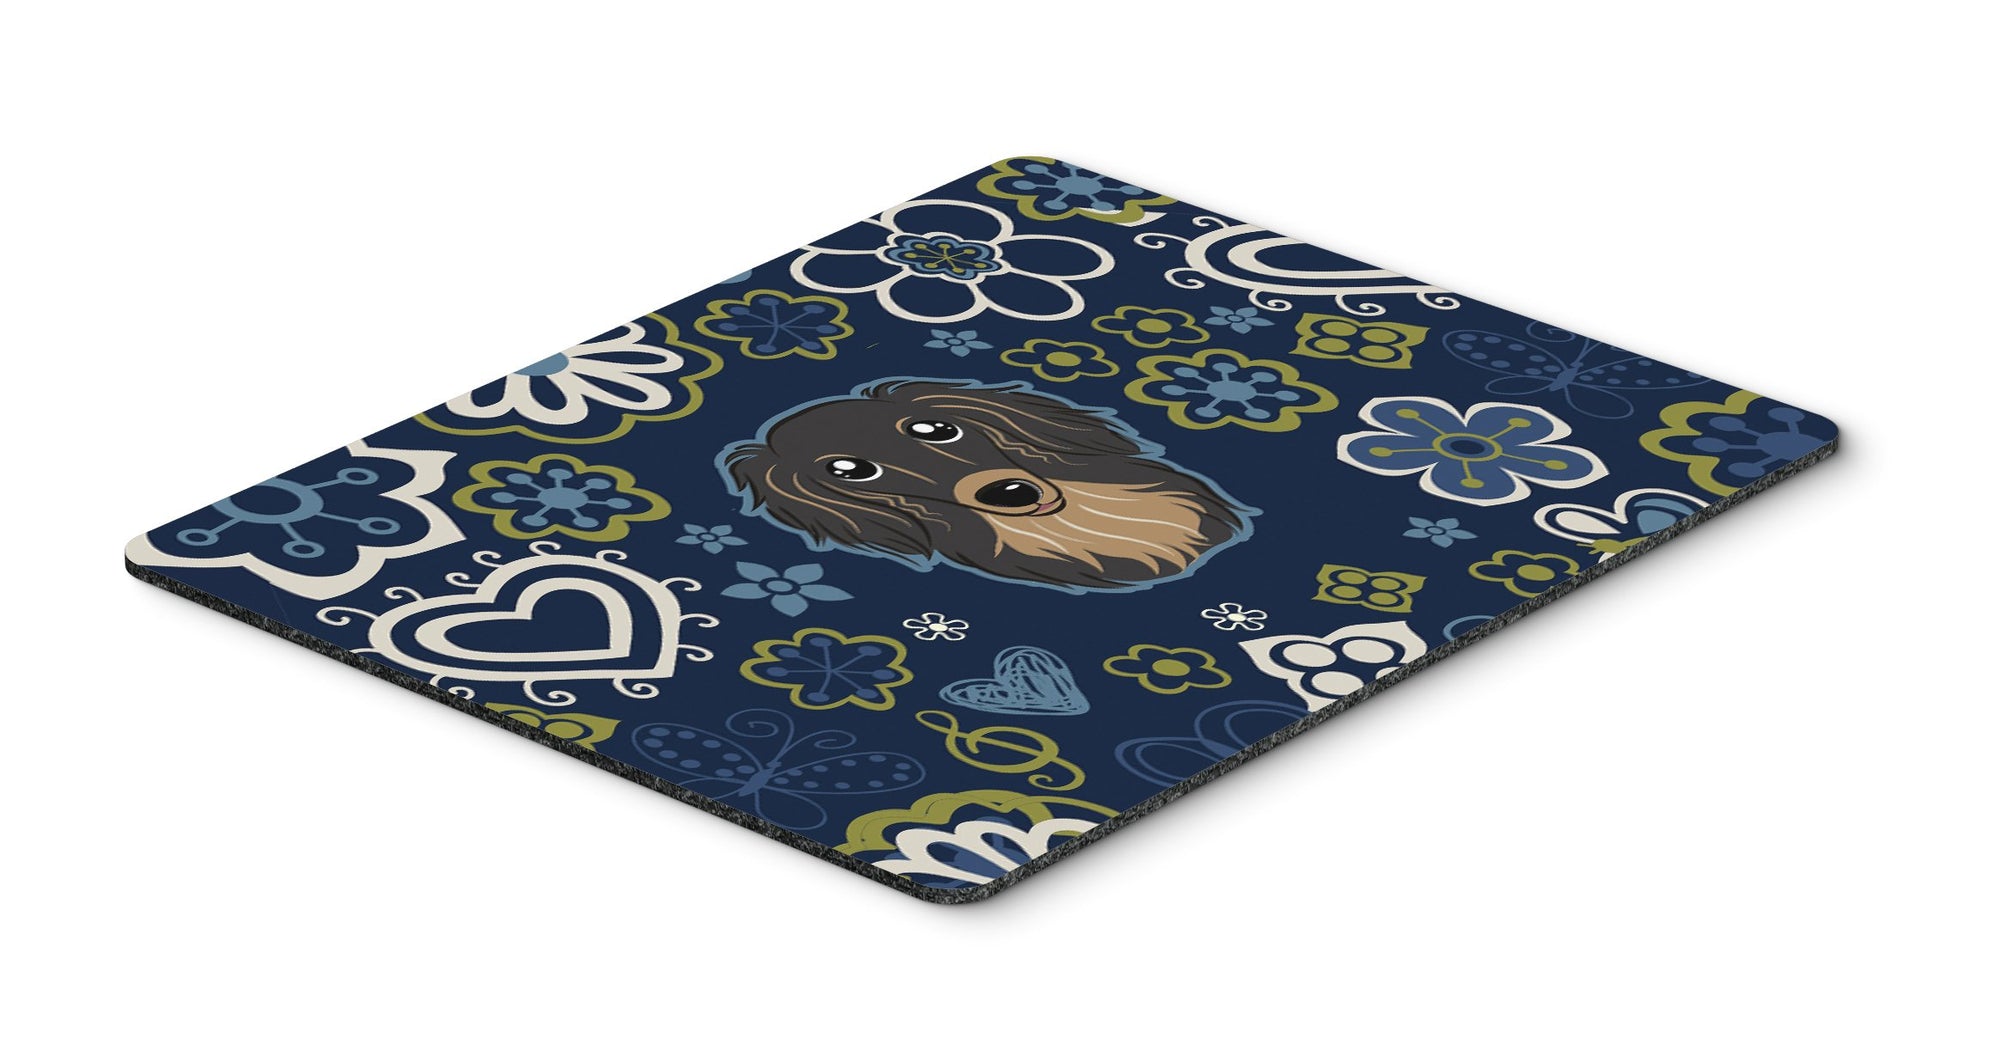 Blue Flowers Longhair Black and Tan Dachshund Mouse Pad, Hot Pad or Trivet by Caroline's Treasures